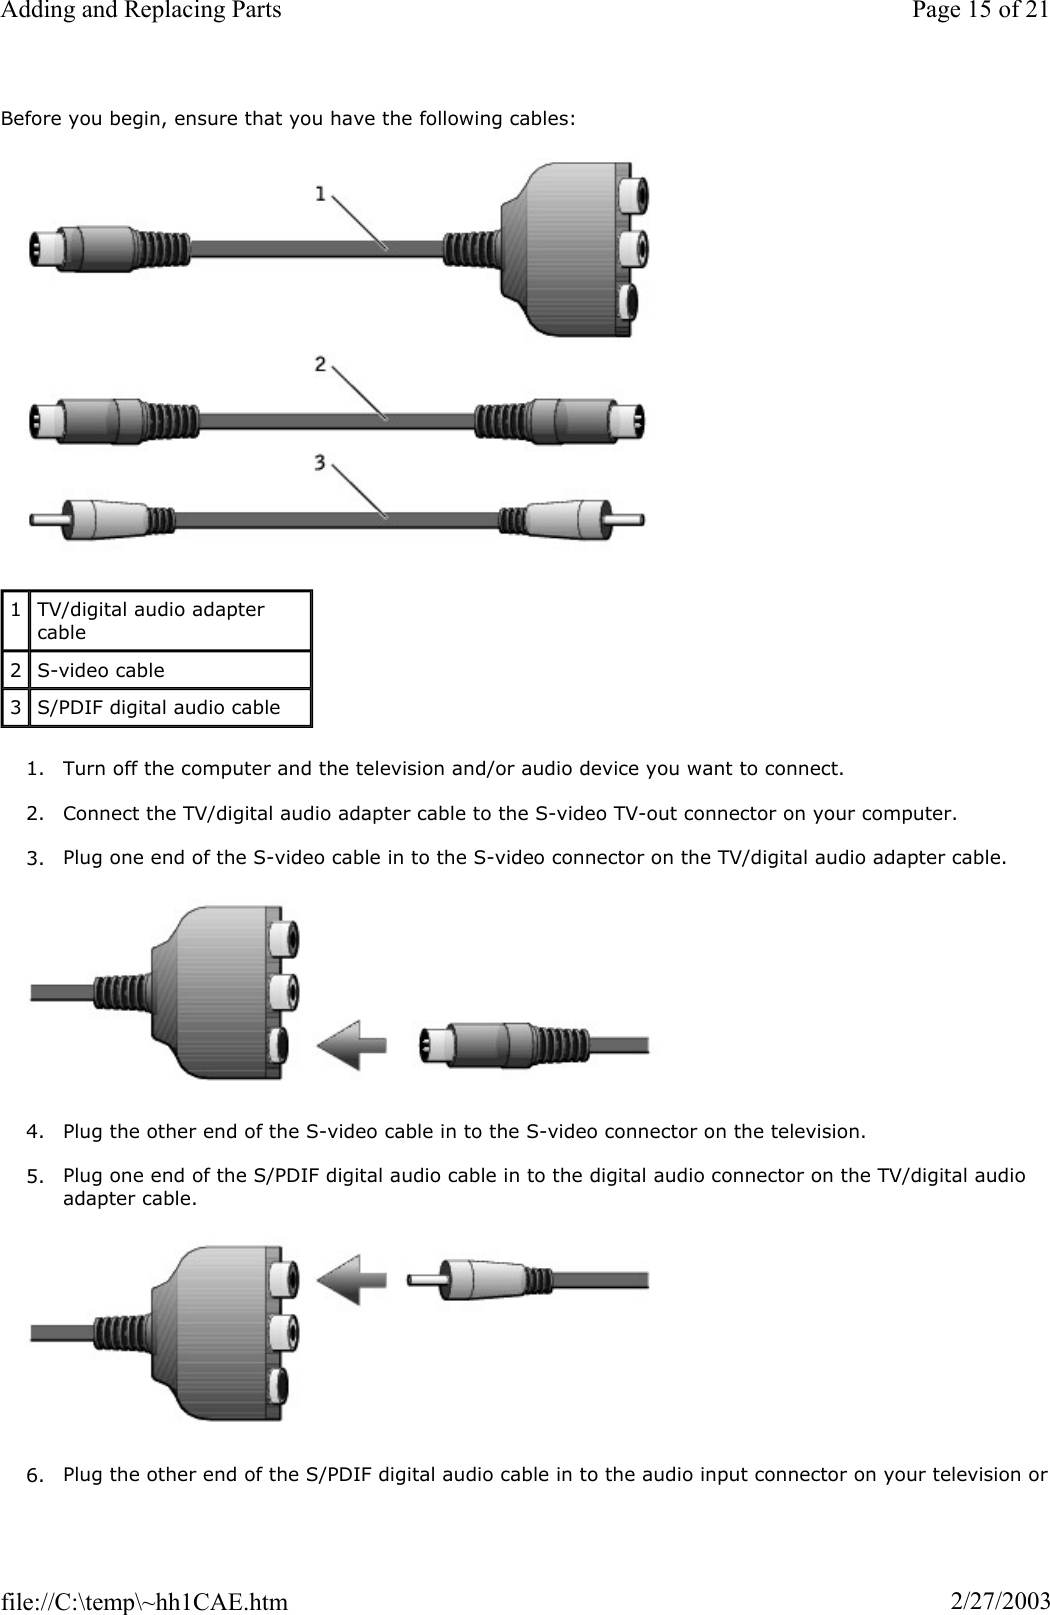 Before you begin, ensure that you have the following cables: 1. Turn off the computer and the television and/or audio device you want to connect. 2. Connect the TV/digital audio adapter cable to the S-video TV-out connector on your computer. 3. Plug one end of the S-video cable in to the S-video connector on the TV/digital audio adapter cable. 4. Plug the other end of the S-video cable in to the S-video connector on the television. 5. Plug one end of the S/PDIF digital audio cable in to the digital audio connector on the TV/digital audio adapter cable. 6. Plug the other end of the S/PDIF digital audio cable in to the audio input connector on your television or1TV/digital audio adapter cable 2S-video cable 3S/PDIF digital audio cable Page 15 of 21Adding and Replacing Parts2/27/2003file://C:\temp\~hh1CAE.htm